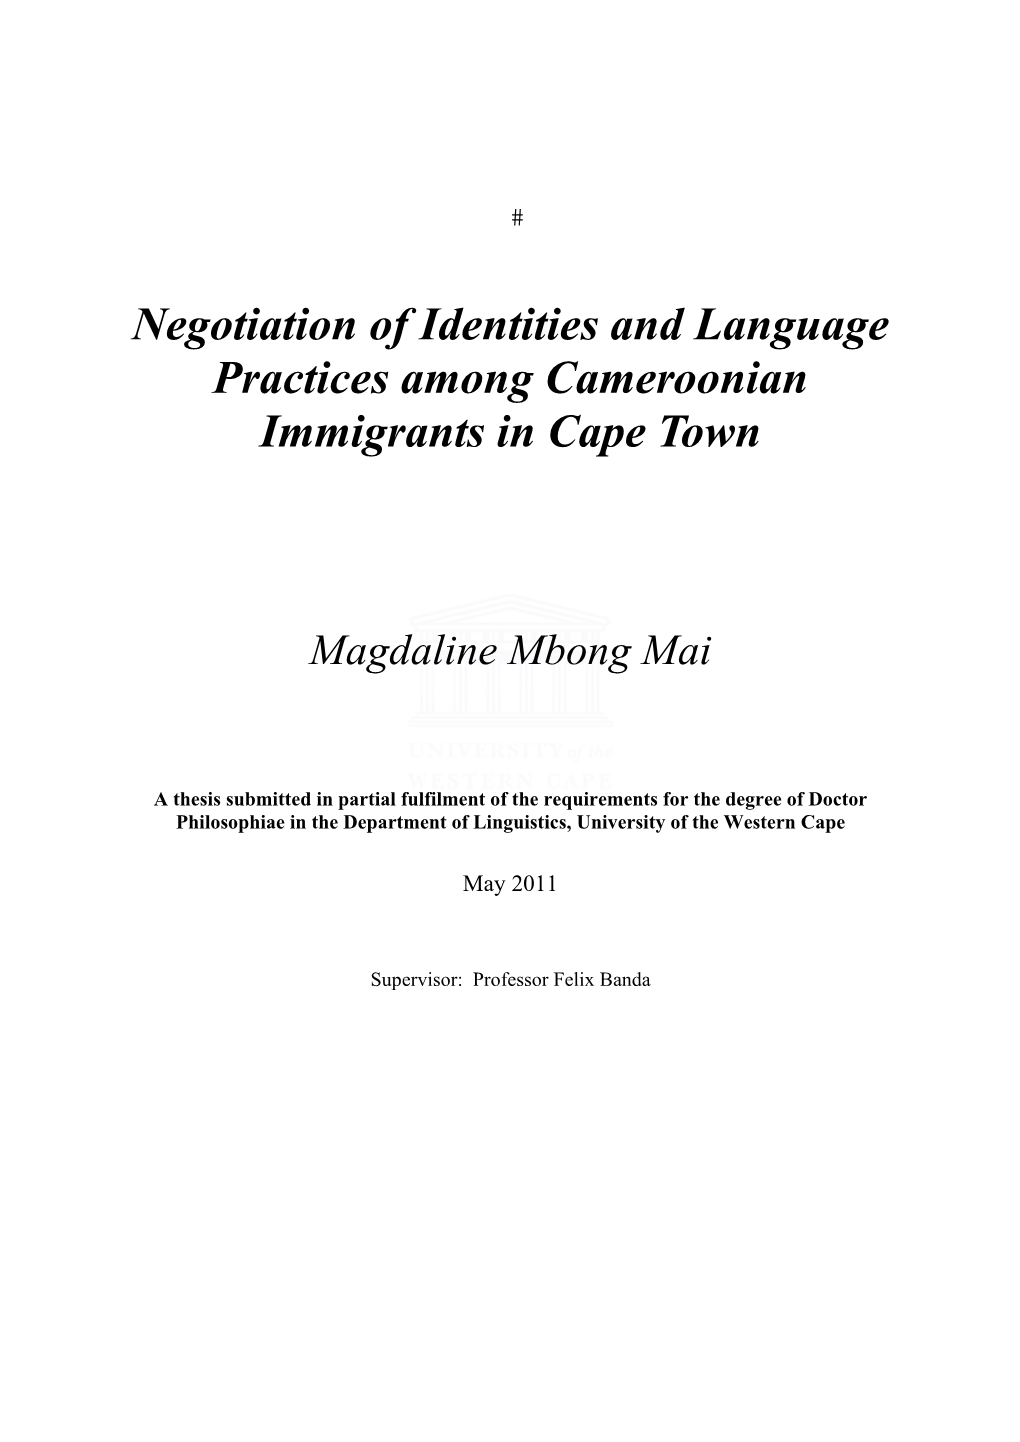 Negotiation of Identities and Language Practices Among Cameroonian Immigrants in Cape Town